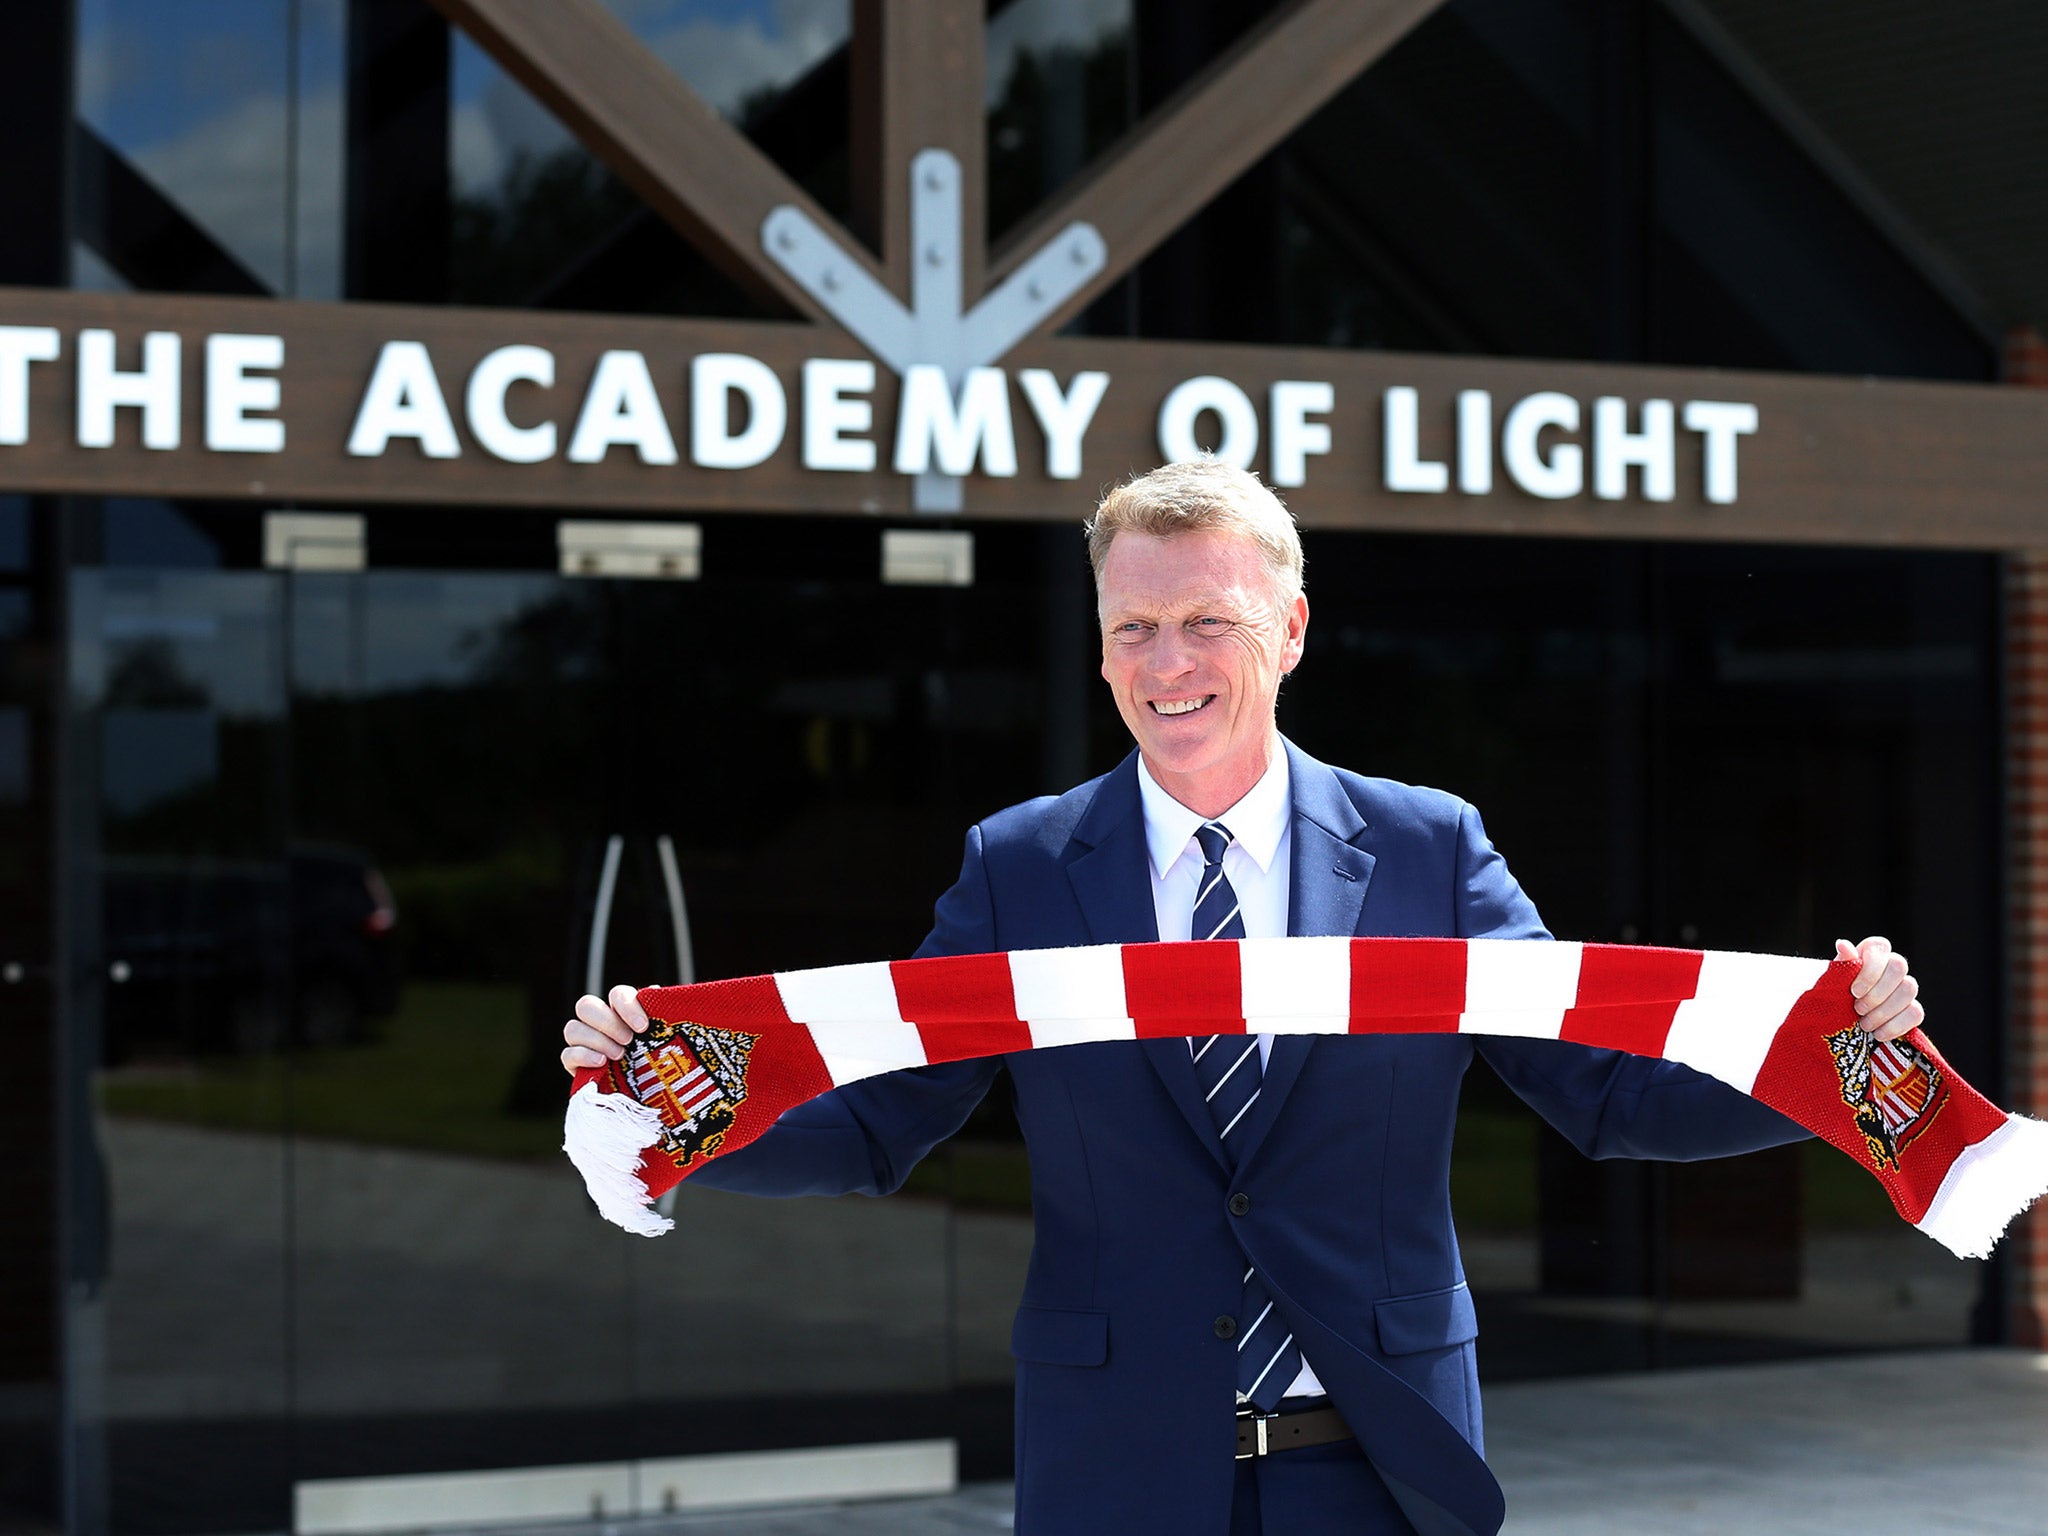 Moyes returns to the Premier League after a year in Spain with Real Sociedad